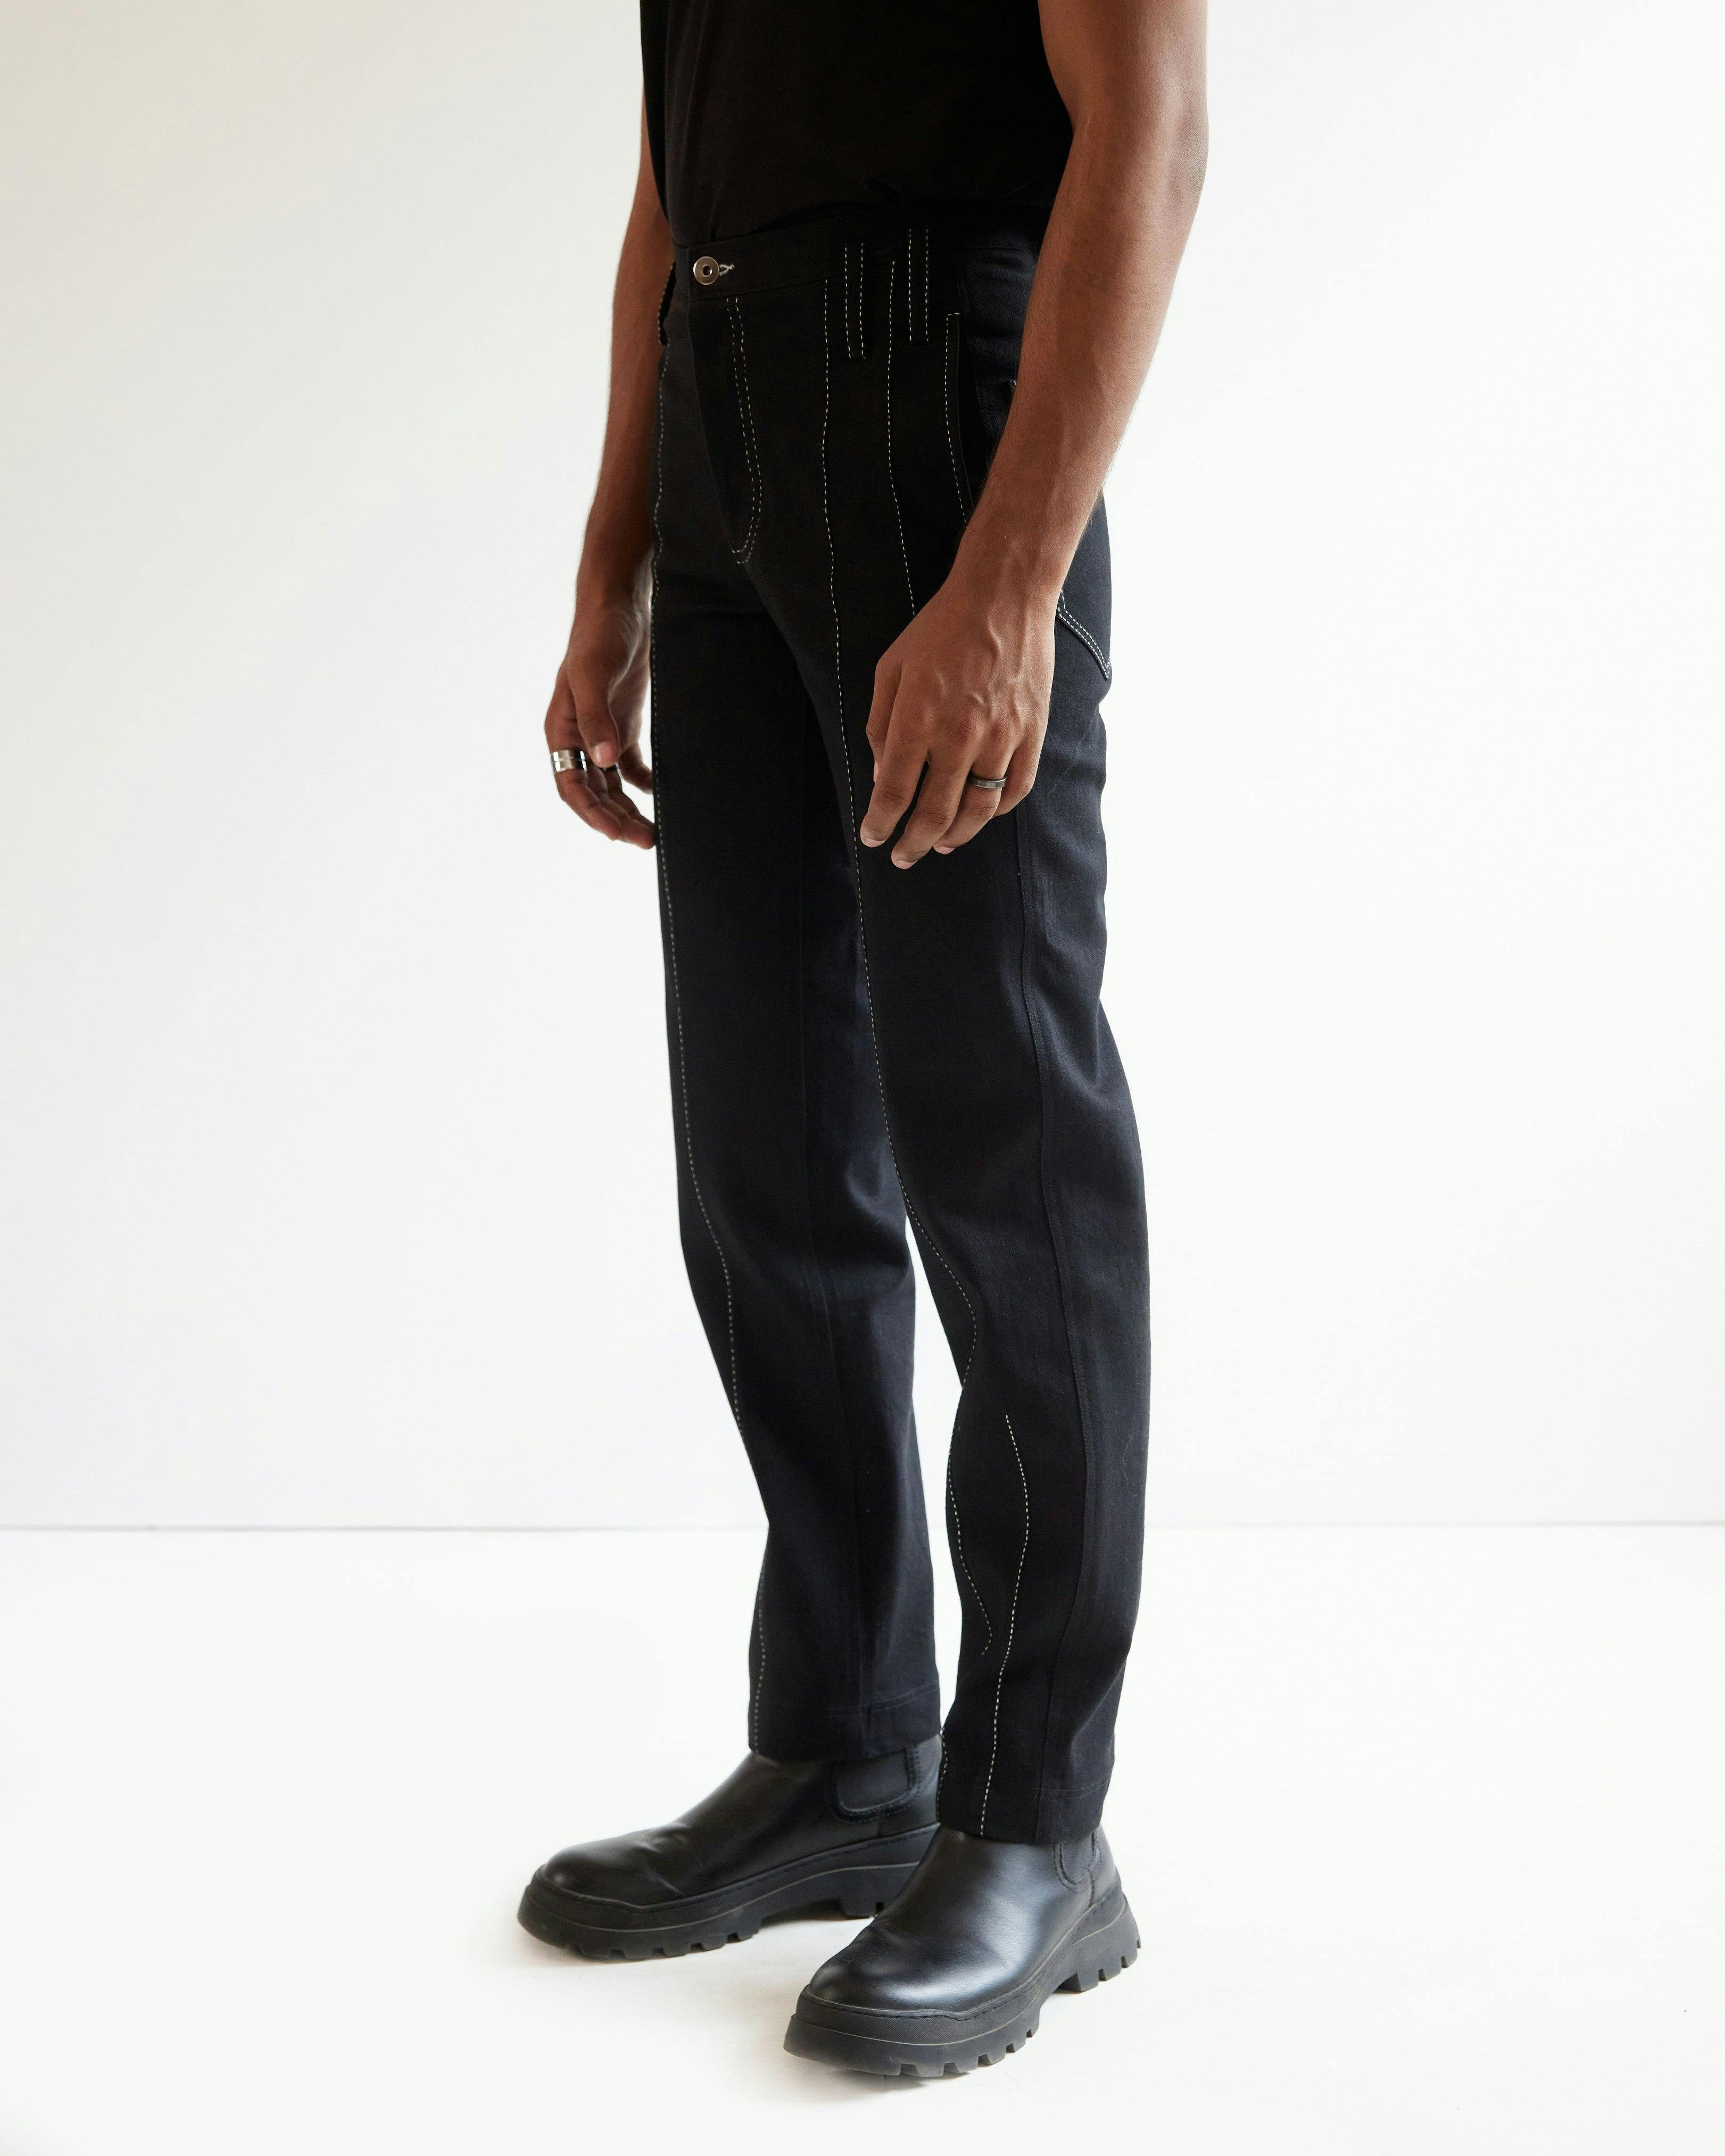 Dart Embroidered Denim Black, a product by Country Made